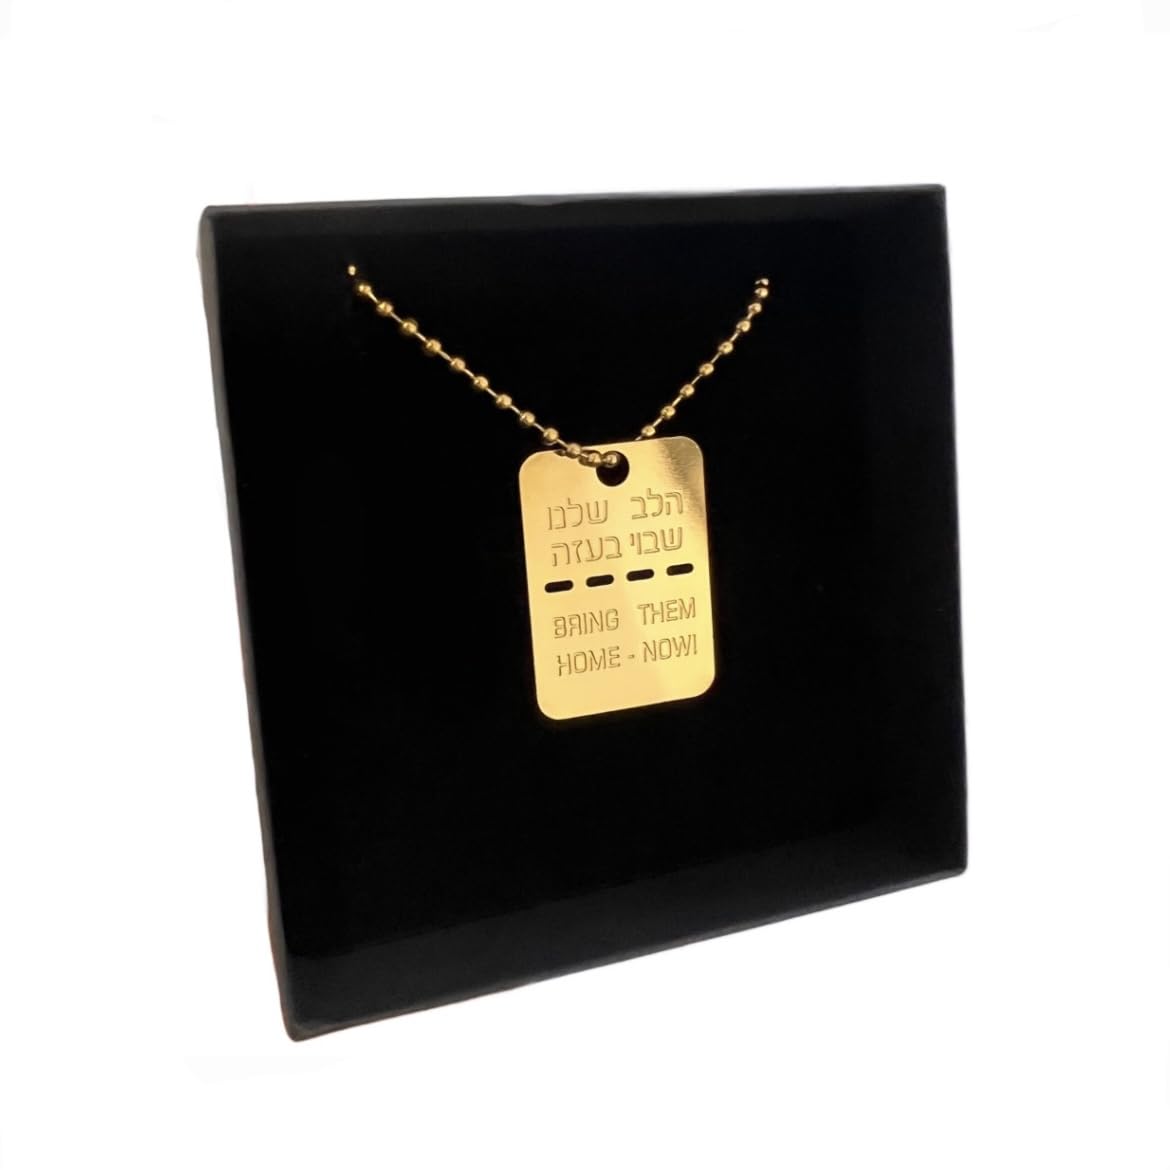 18K Gold Plated Bring Them Home Now Two Sides Tag Handmade Necklace Jewelry Women Men Unisex Chain Israel military necklace Stand with the kidnapped kids and people of Israel Support Israel I Stand